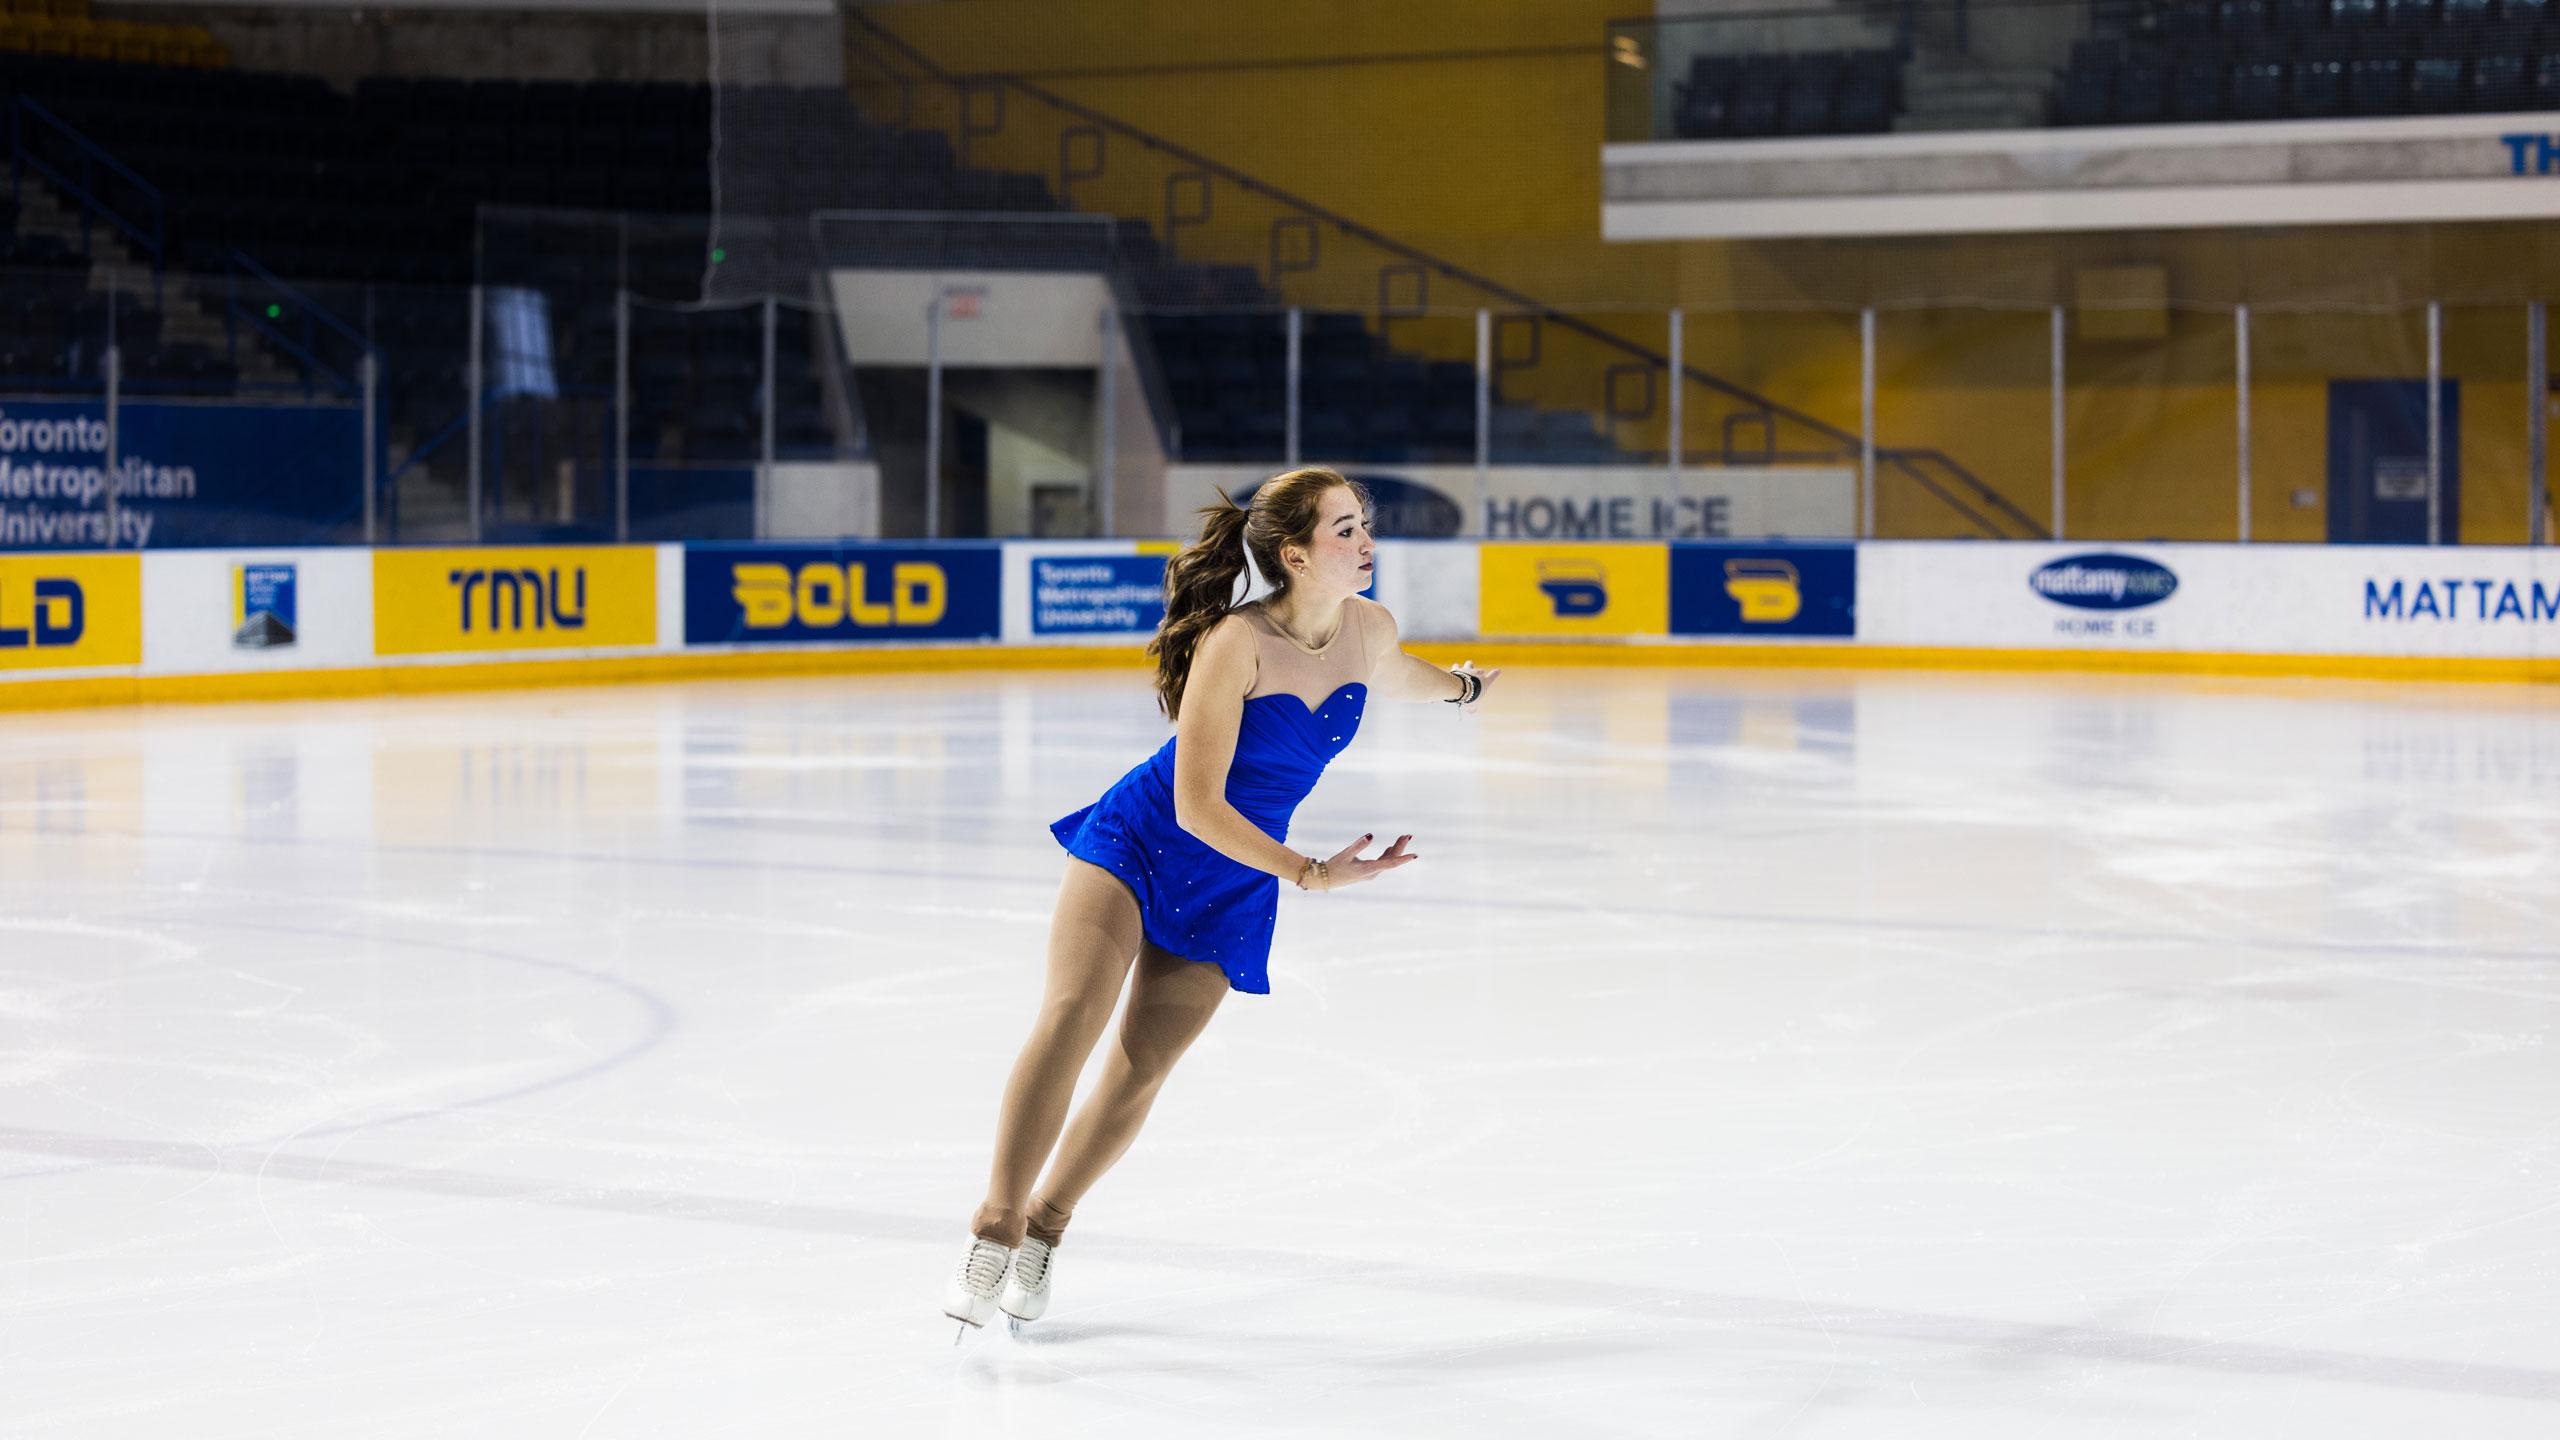 A TMU figure skating in a blue uniform skates at centre ice